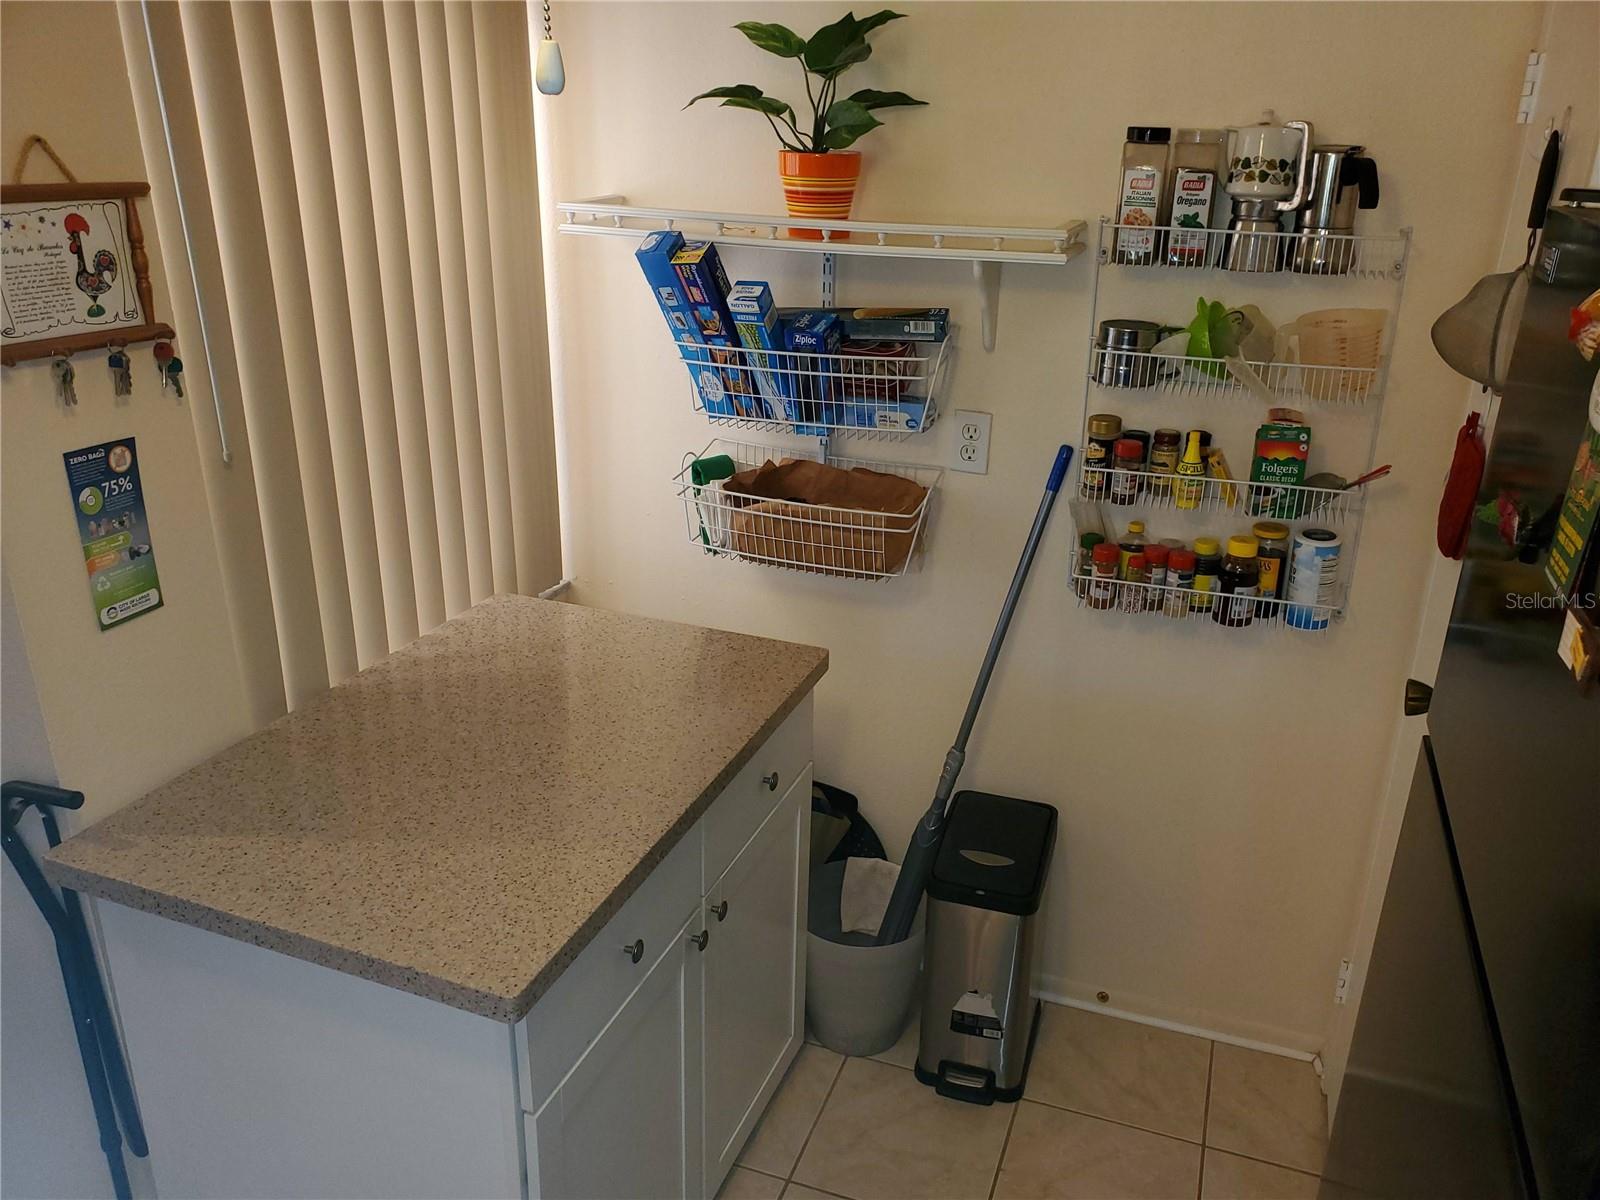 Pantry across from kitchen